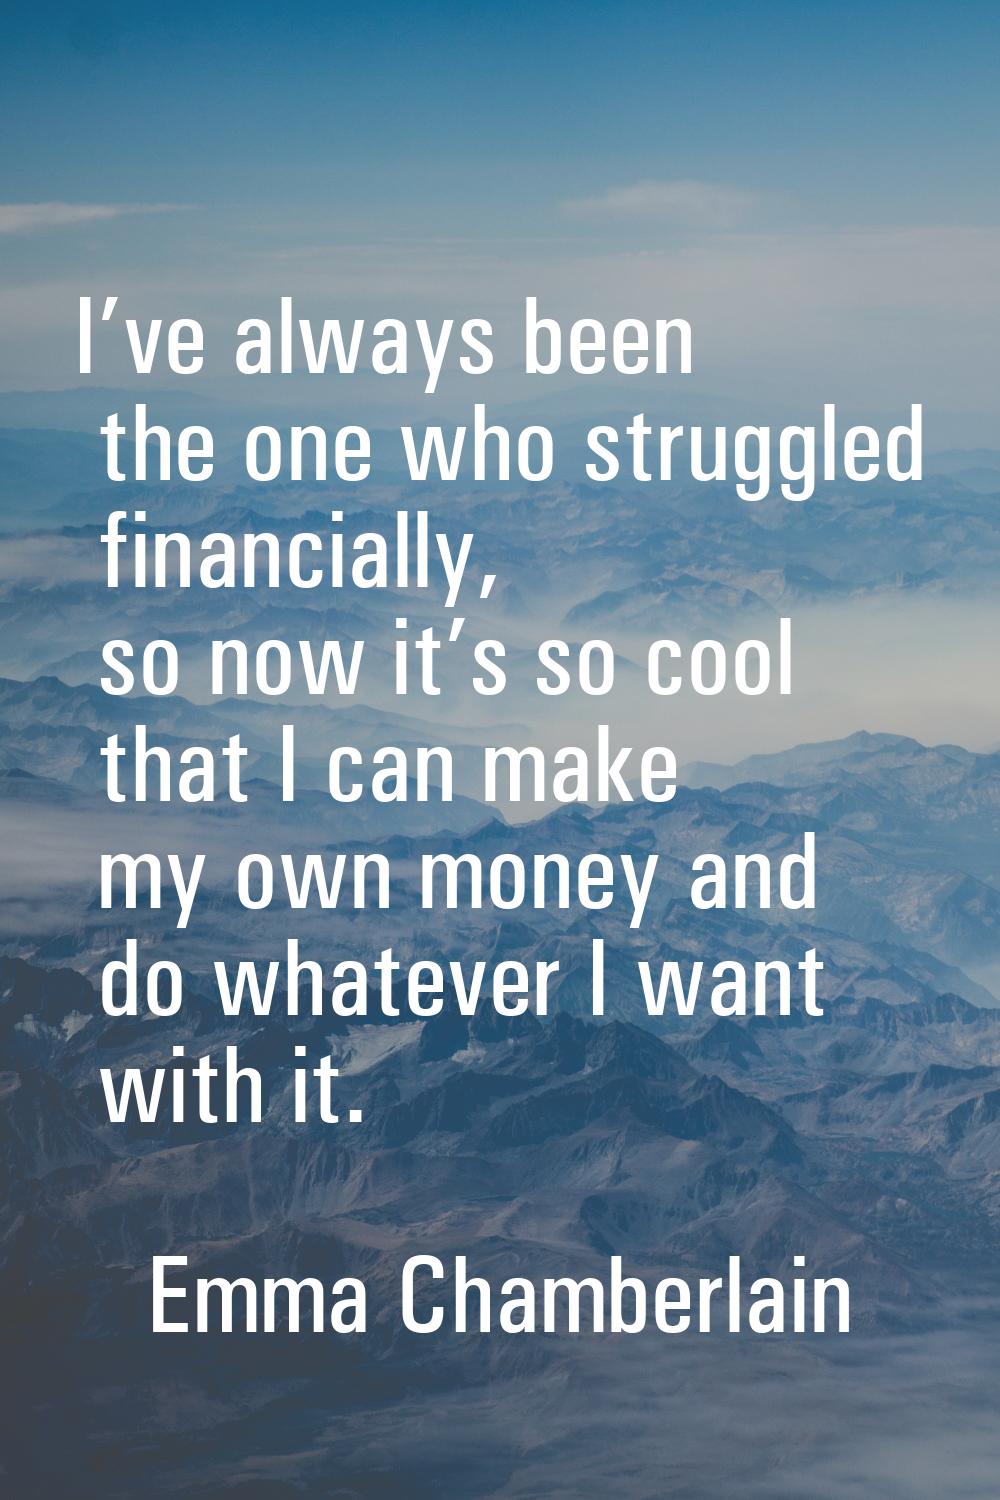 I’ve always been the one who struggled financially, so now it’s so cool that I can make my own mone